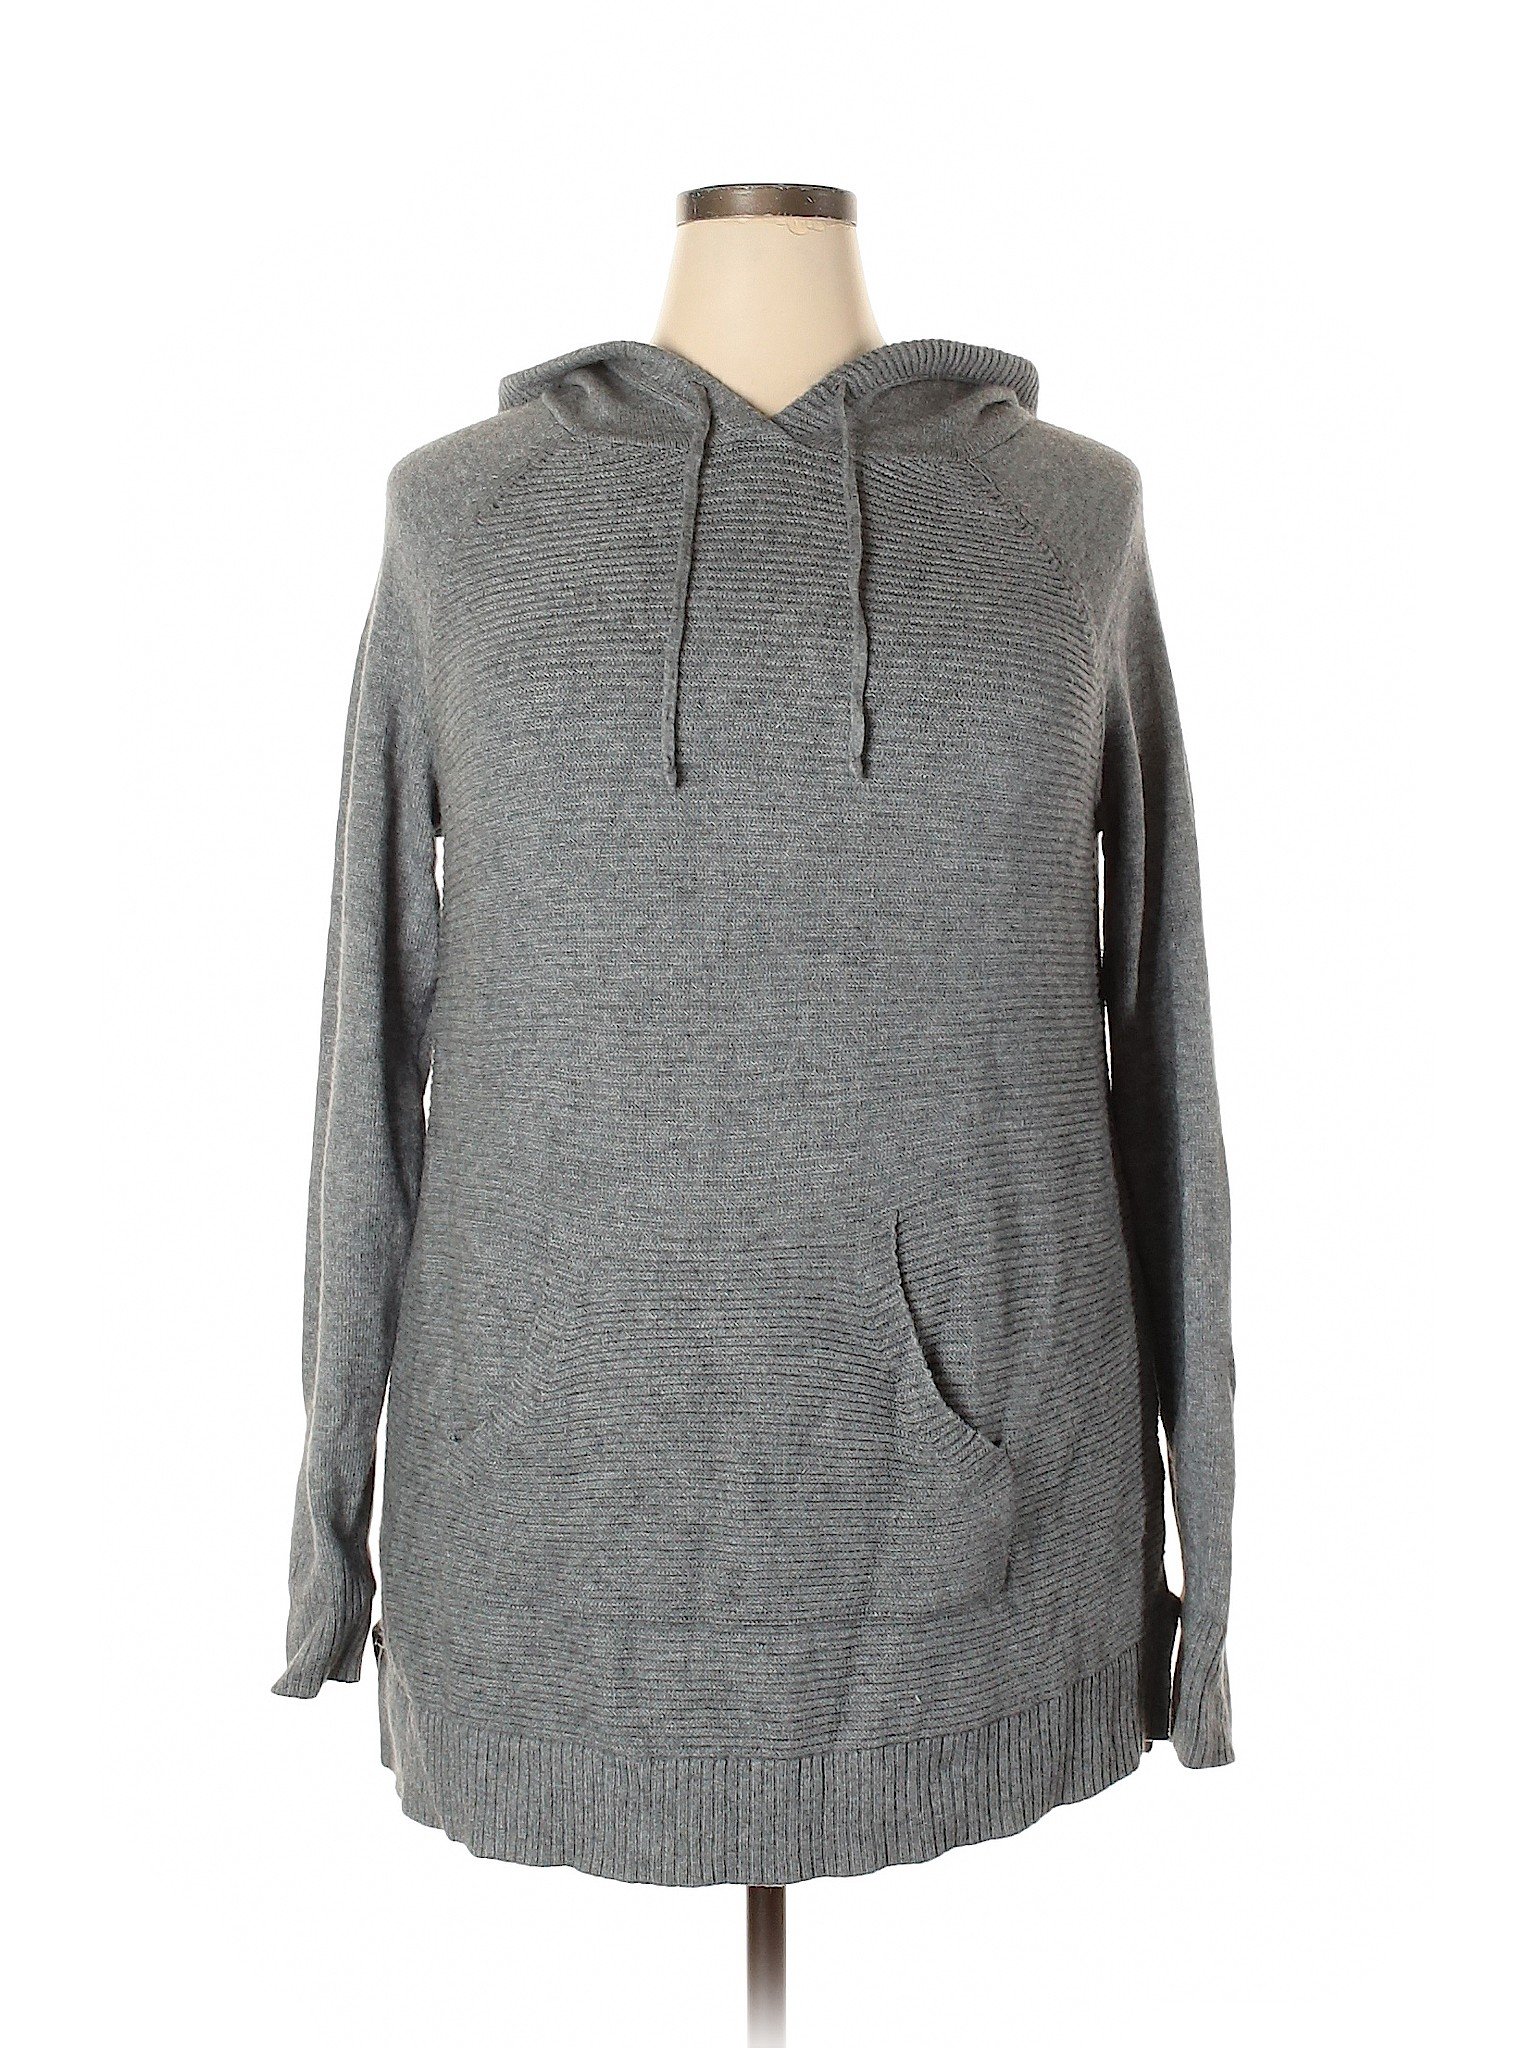 SONOMA life + style Solid Gray Pullover Hoodie Size XL - 83% off | thredUP